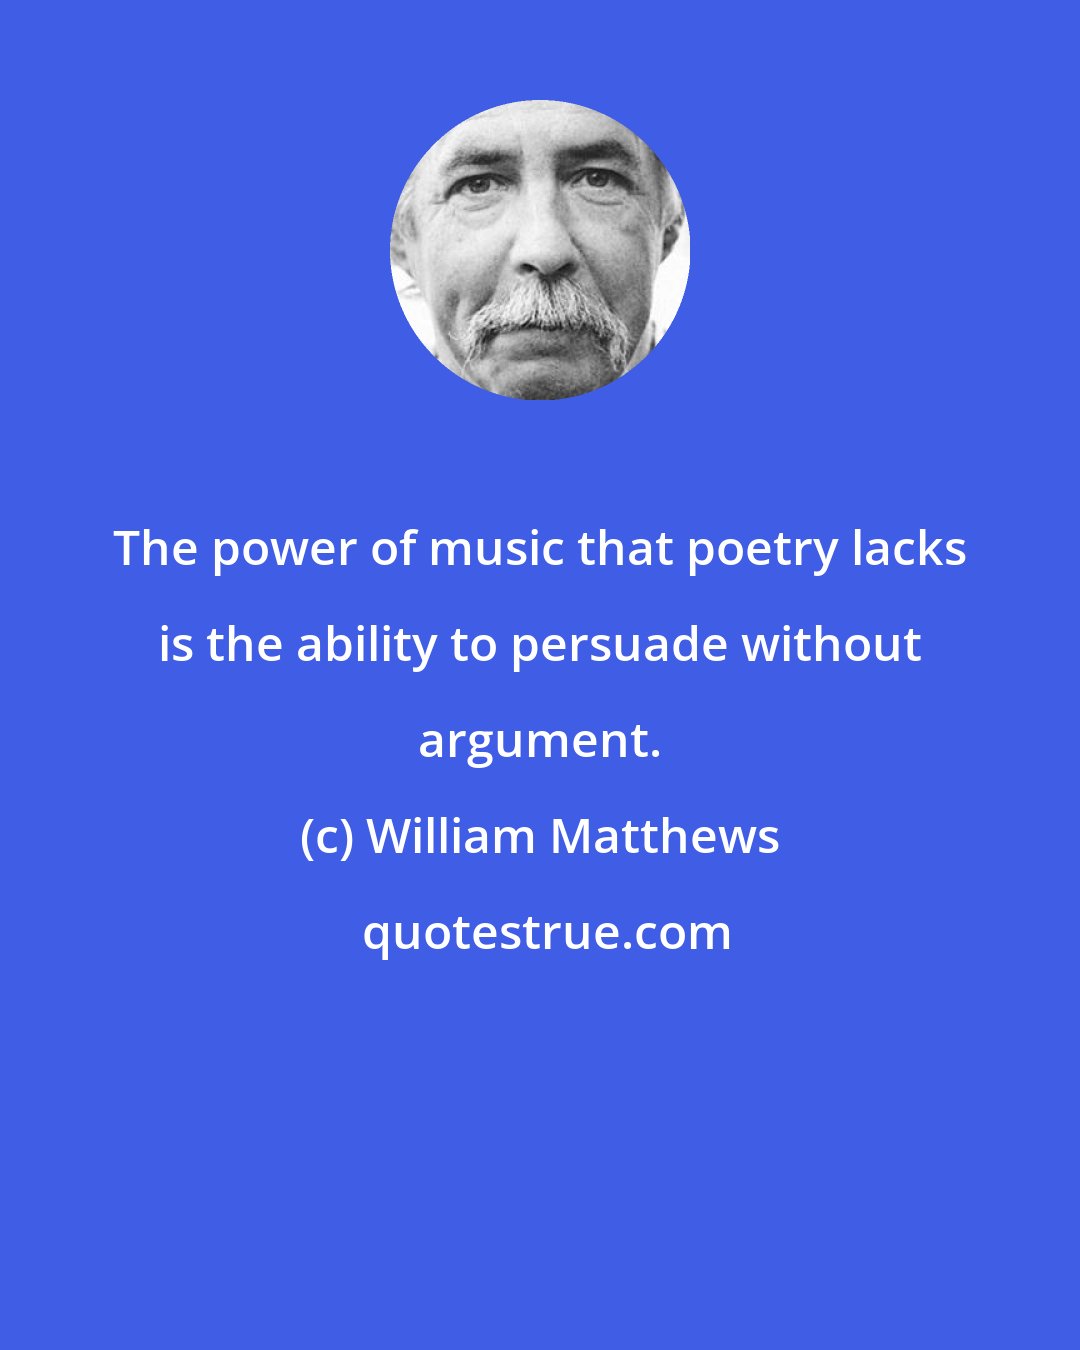 William Matthews: The power of music that poetry lacks is the ability to persuade without argument.